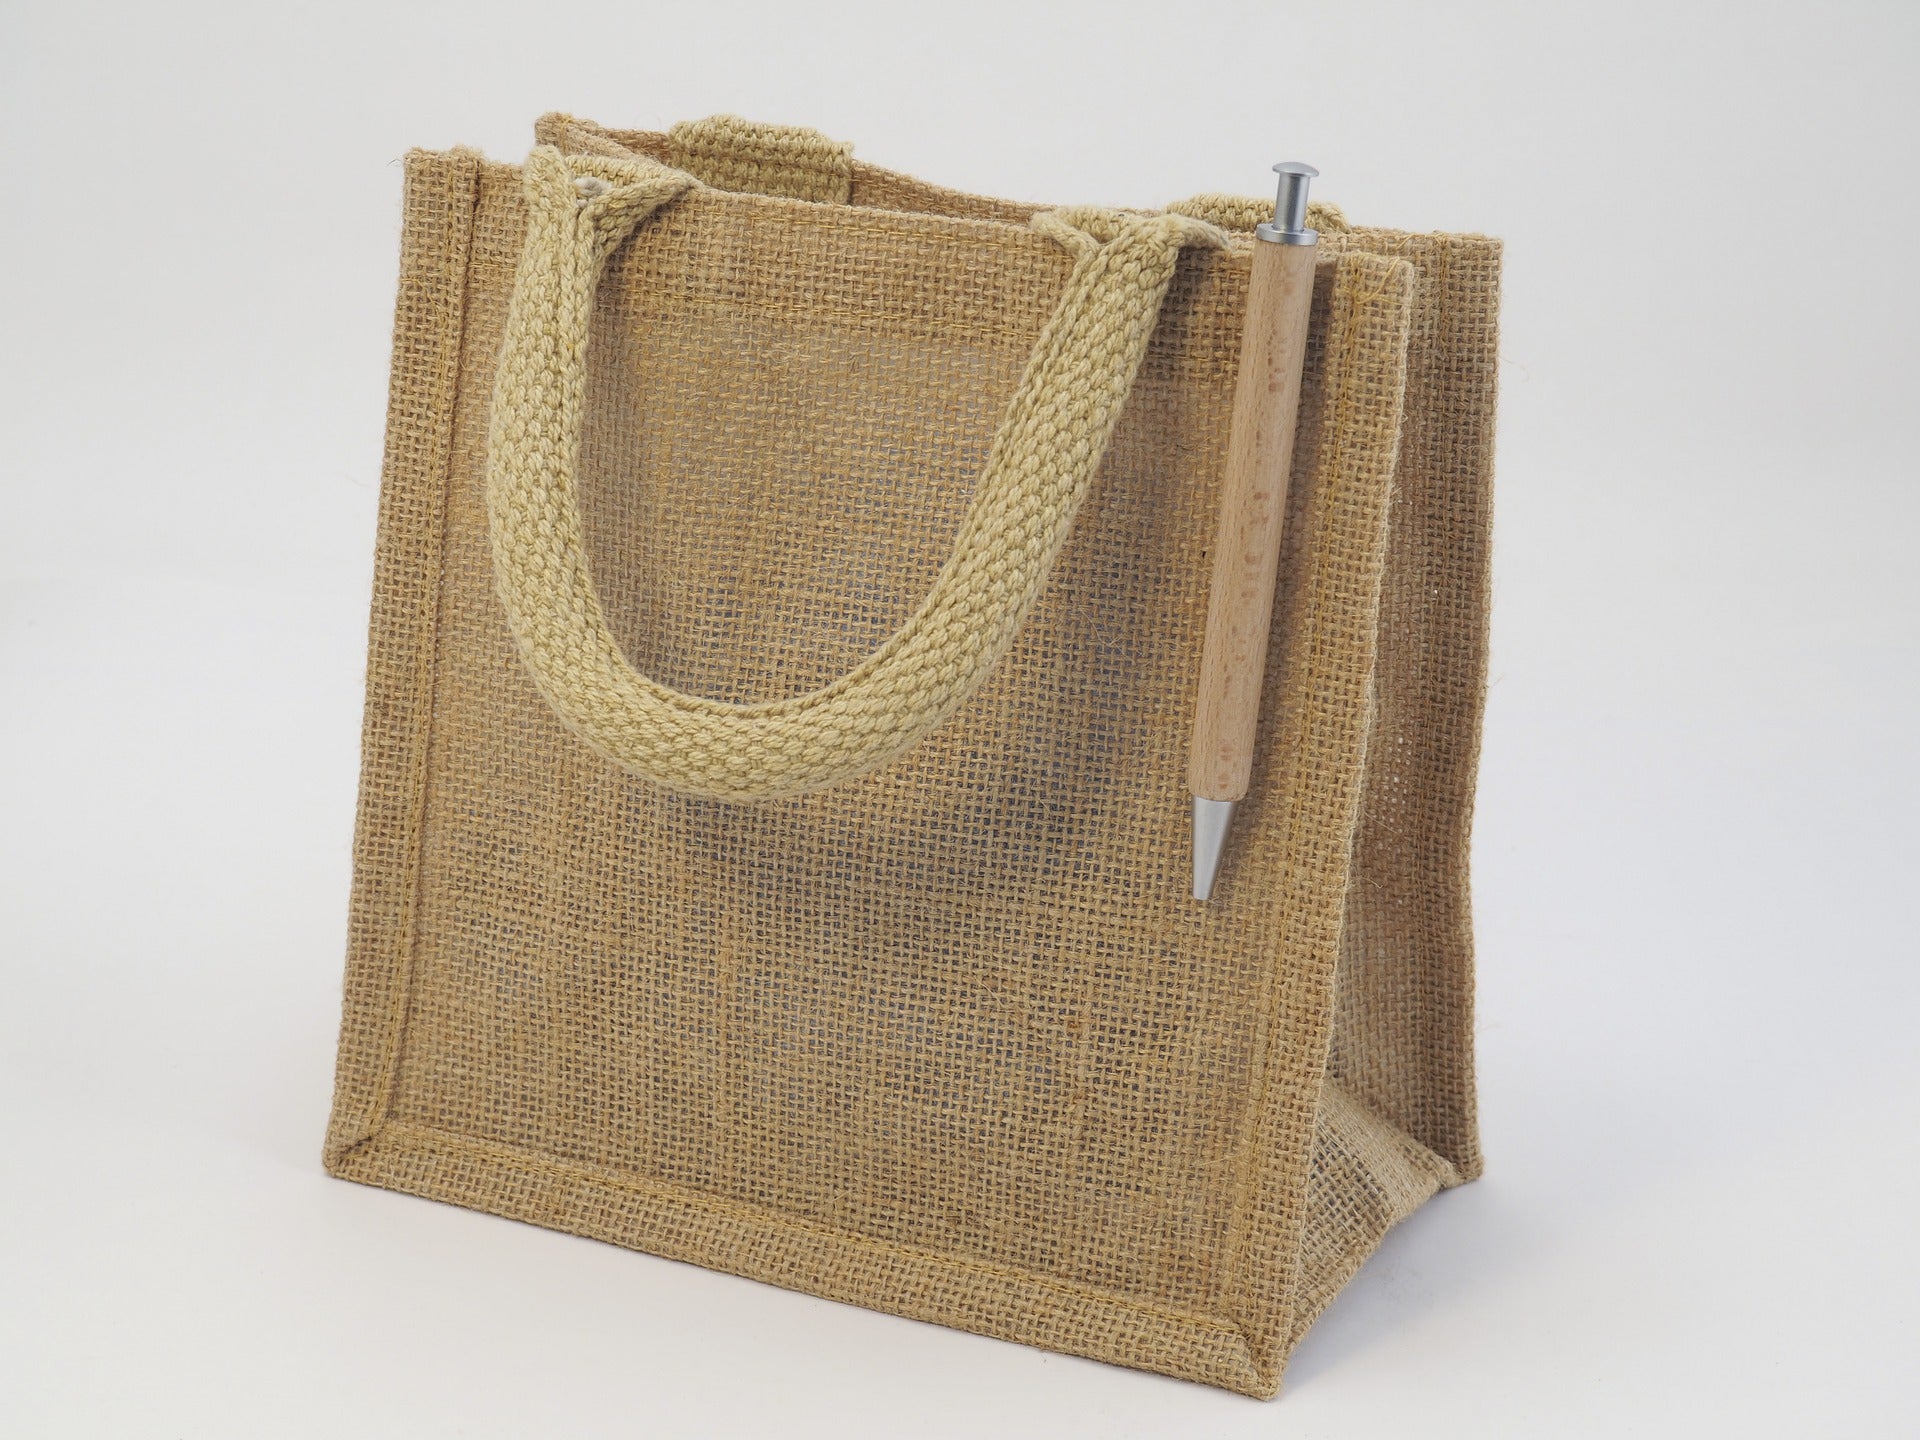 Burlap Tote Bags 101: Everything To Know + Tutorial